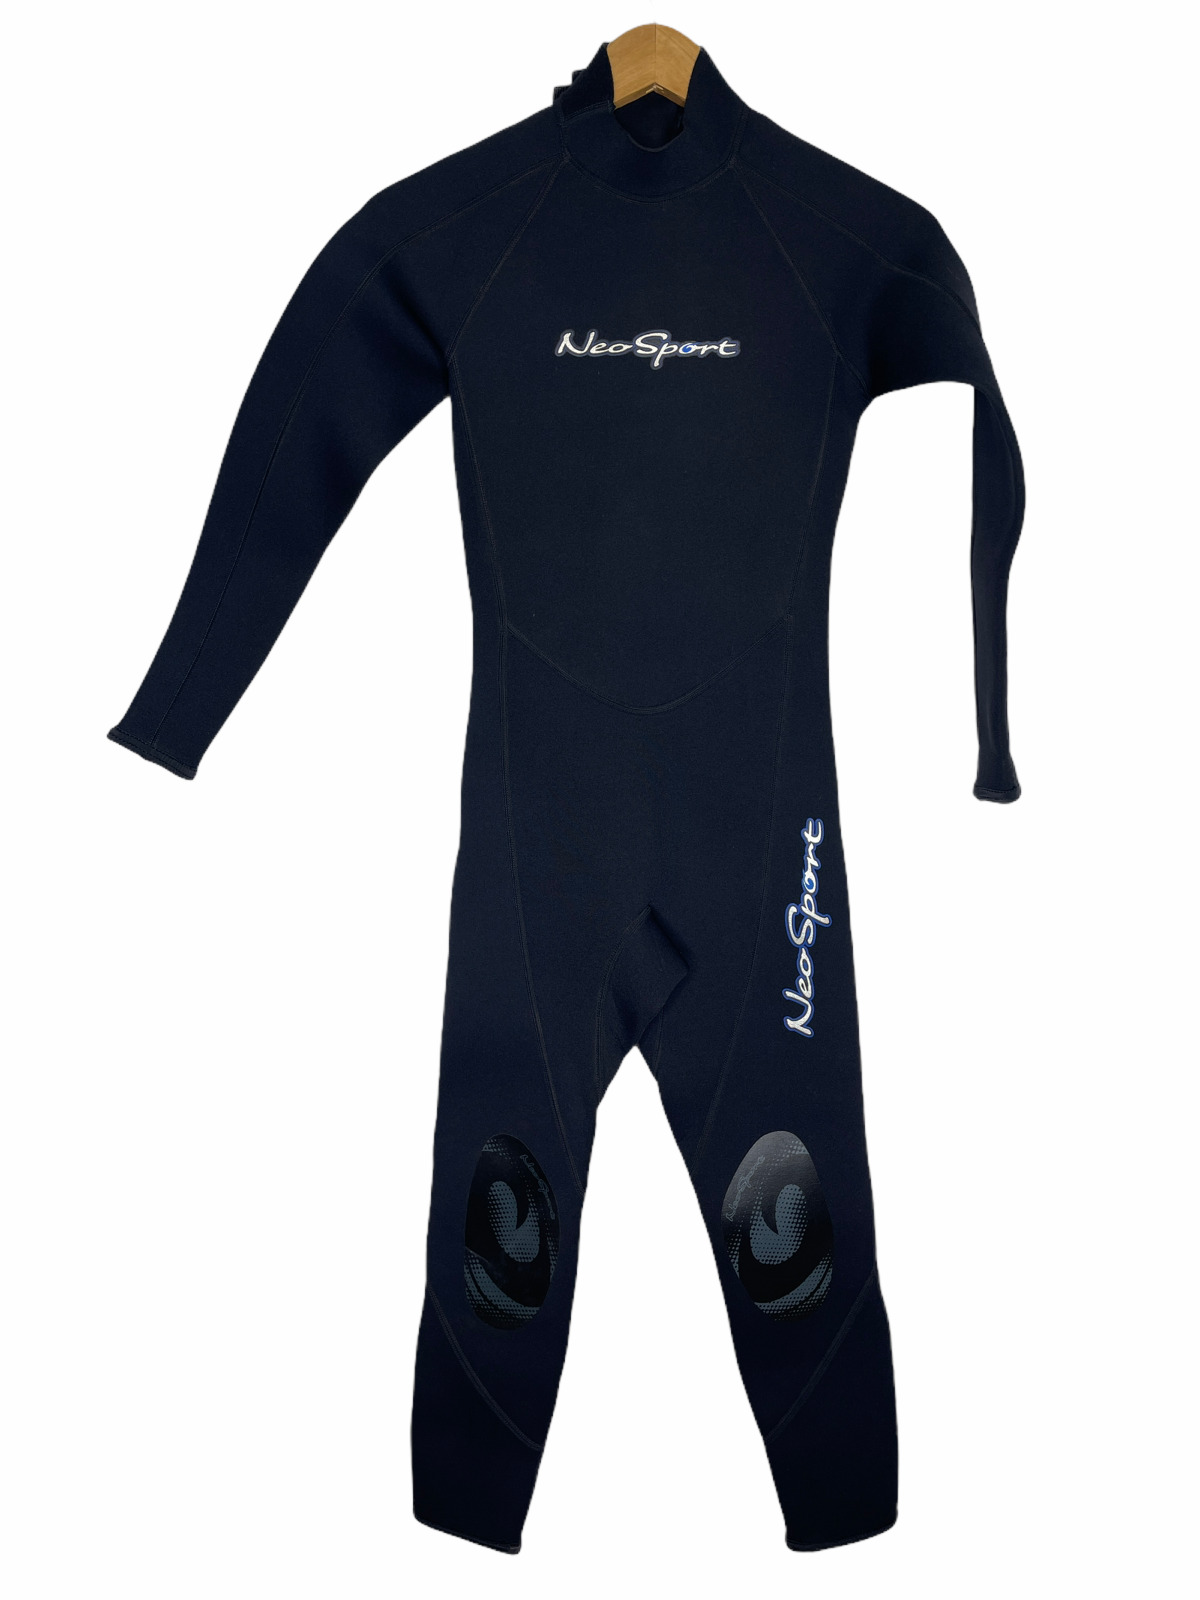 Neosport Childs Full Wetsuit Kids Youth Size 12 Black 3mm